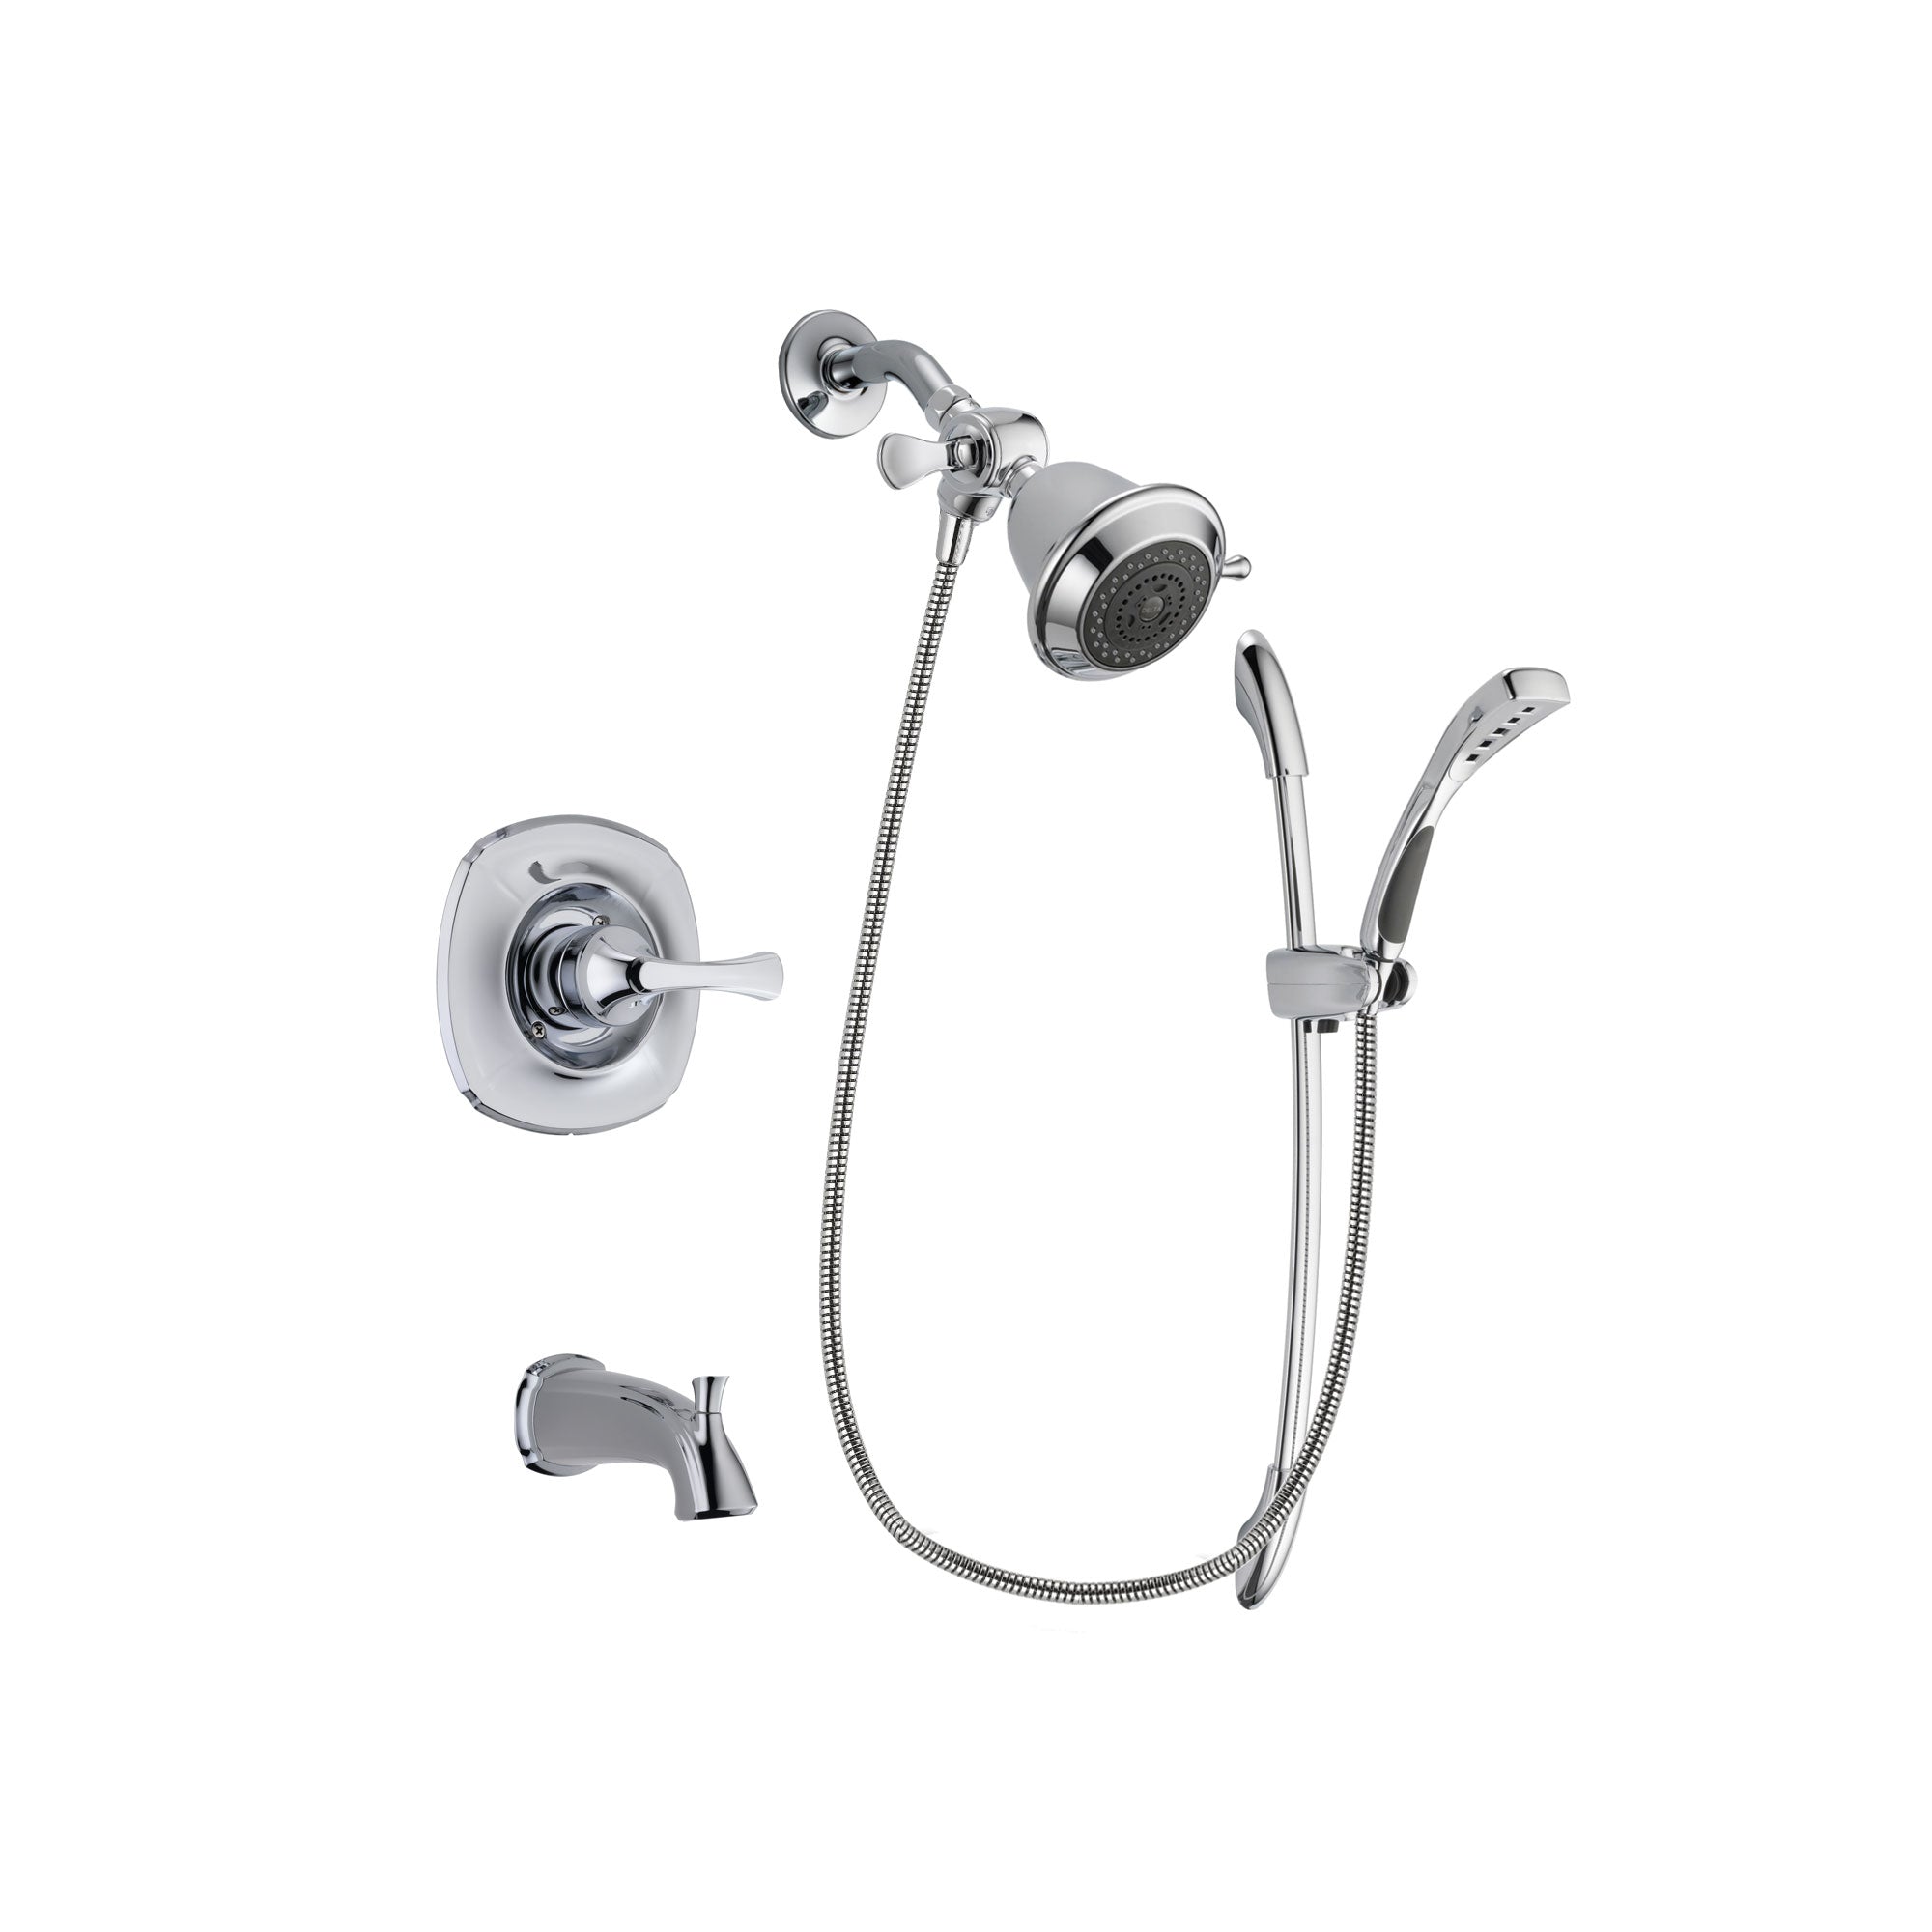 Delta Addison Chrome Finish Tub and Shower Faucet System Package with Shower Head and Handheld Shower with Slide Bar Includes Rough-in Valve and Tub Spout DSP0441V